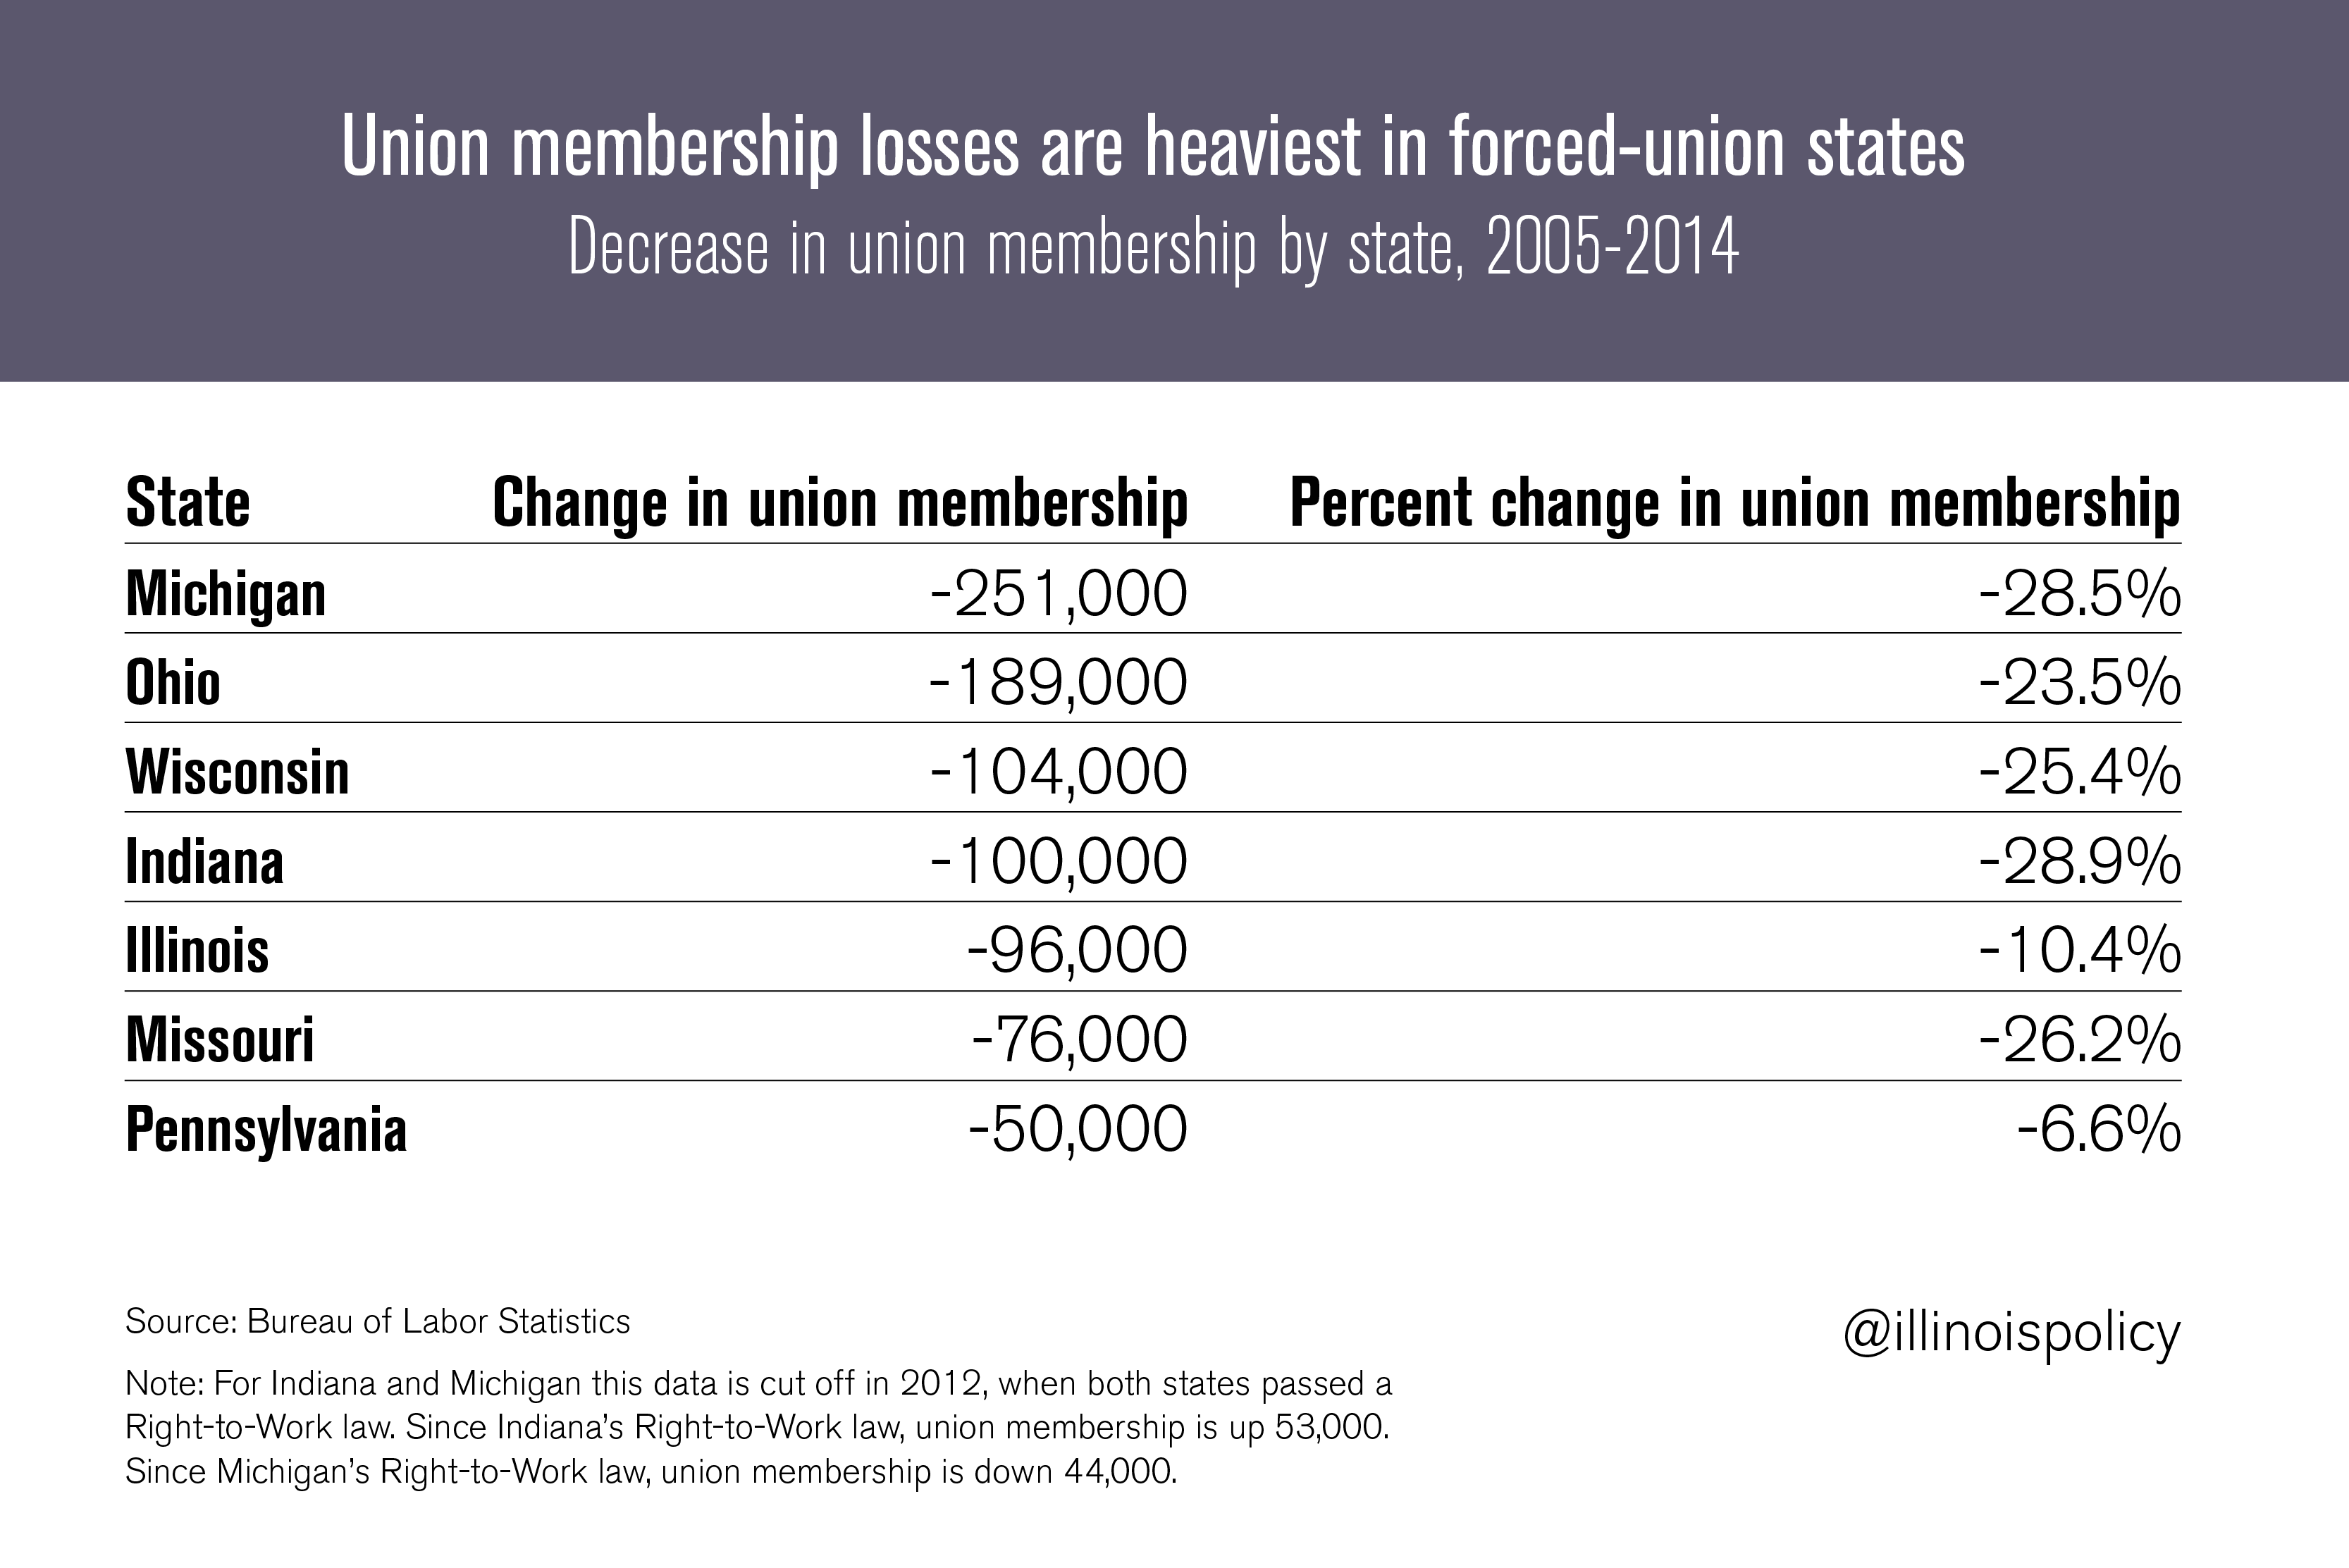 Union membership collapsing in forced-union states